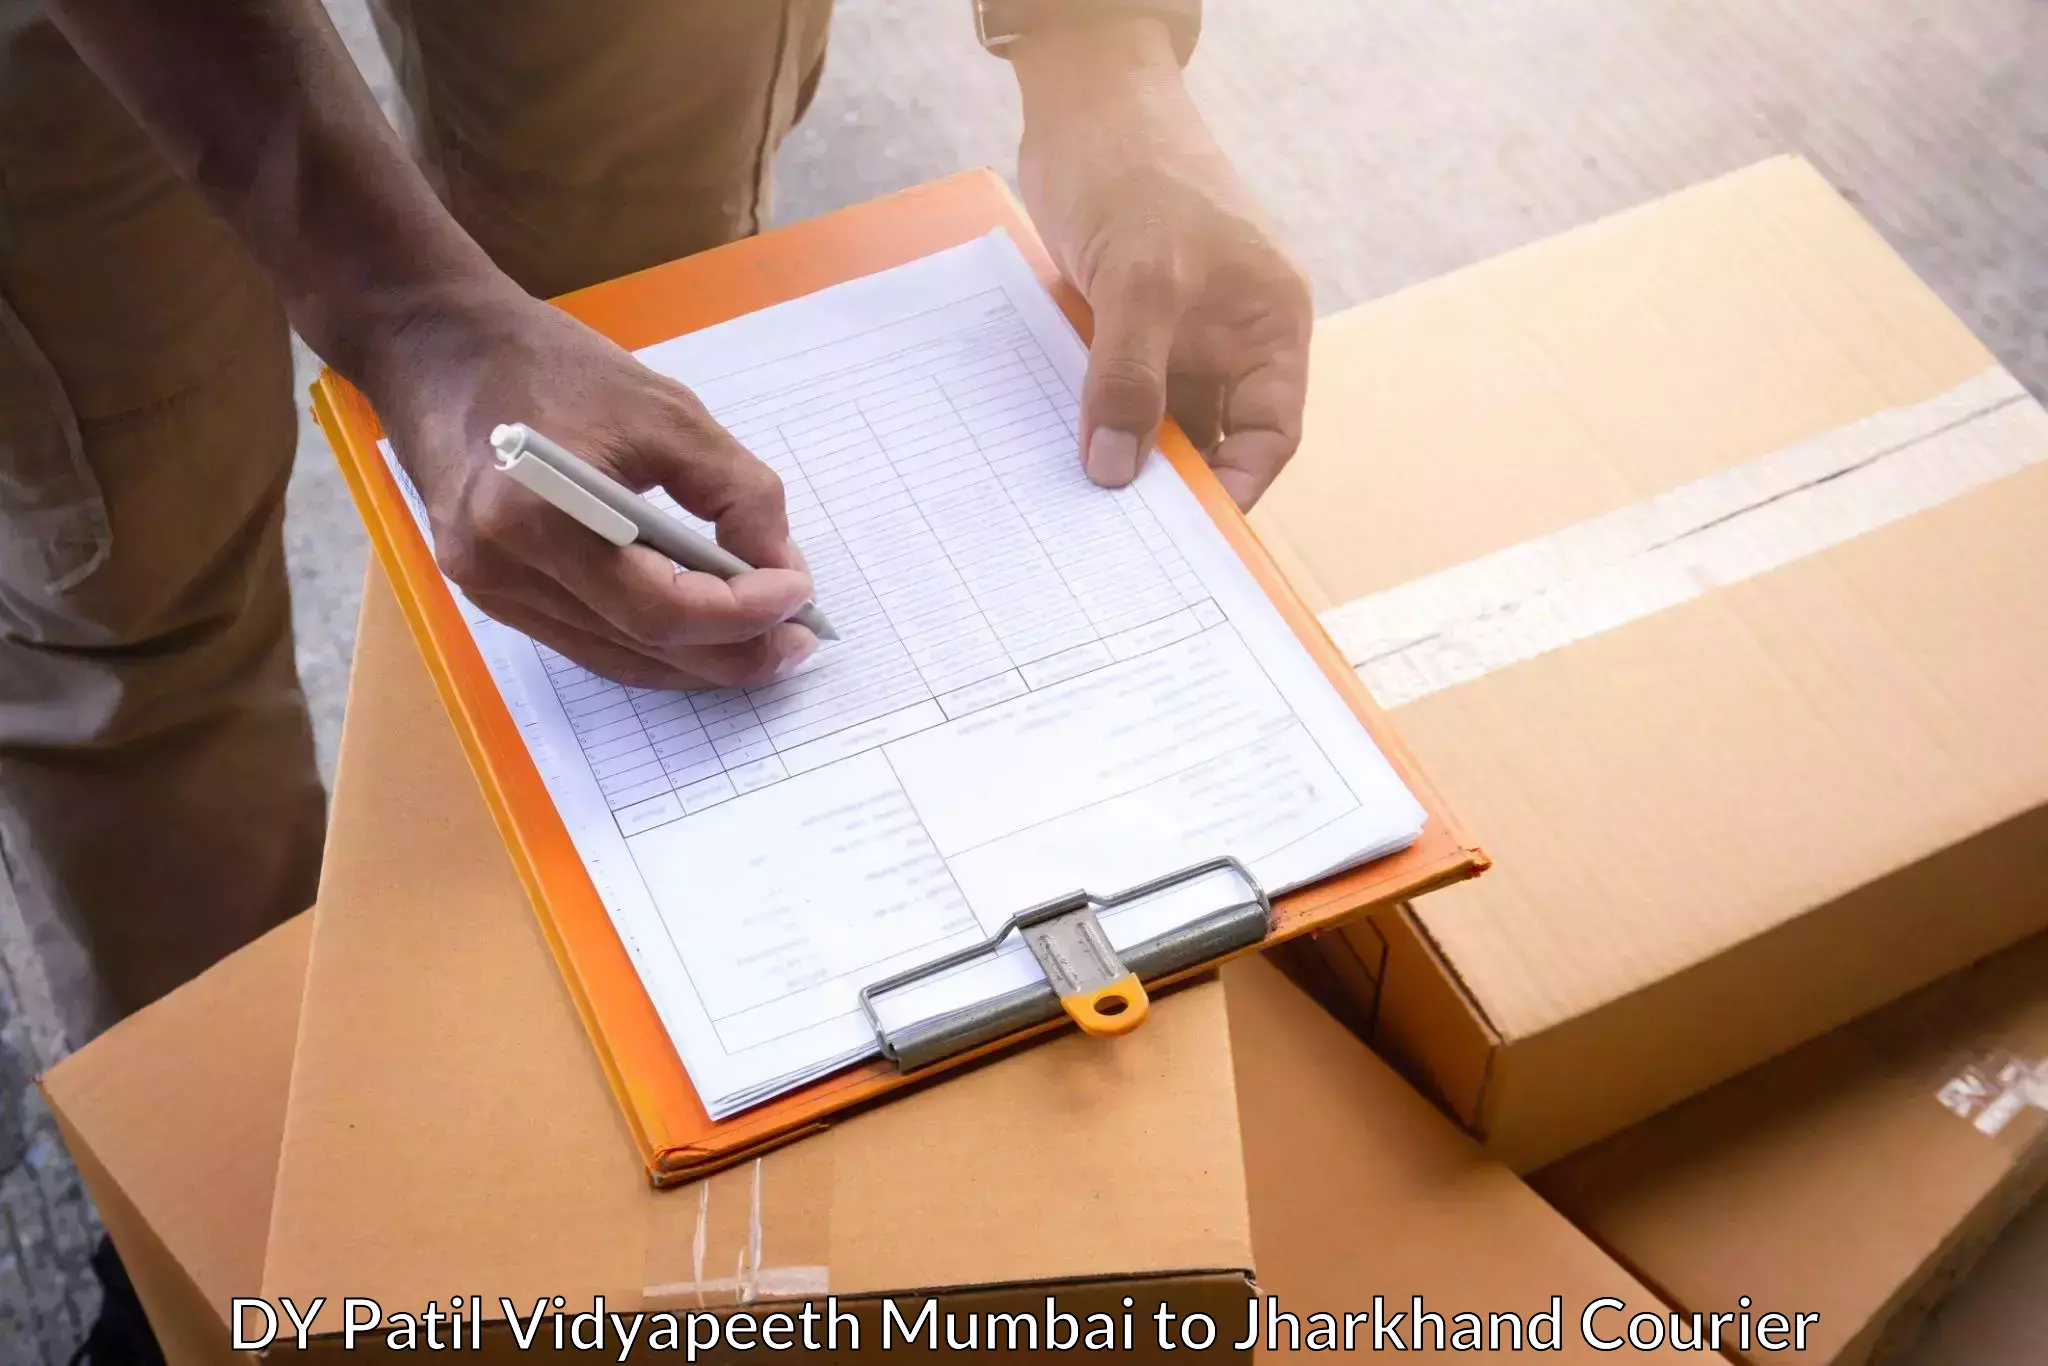 Package delivery network DY Patil Vidyapeeth Mumbai to Satbarwa